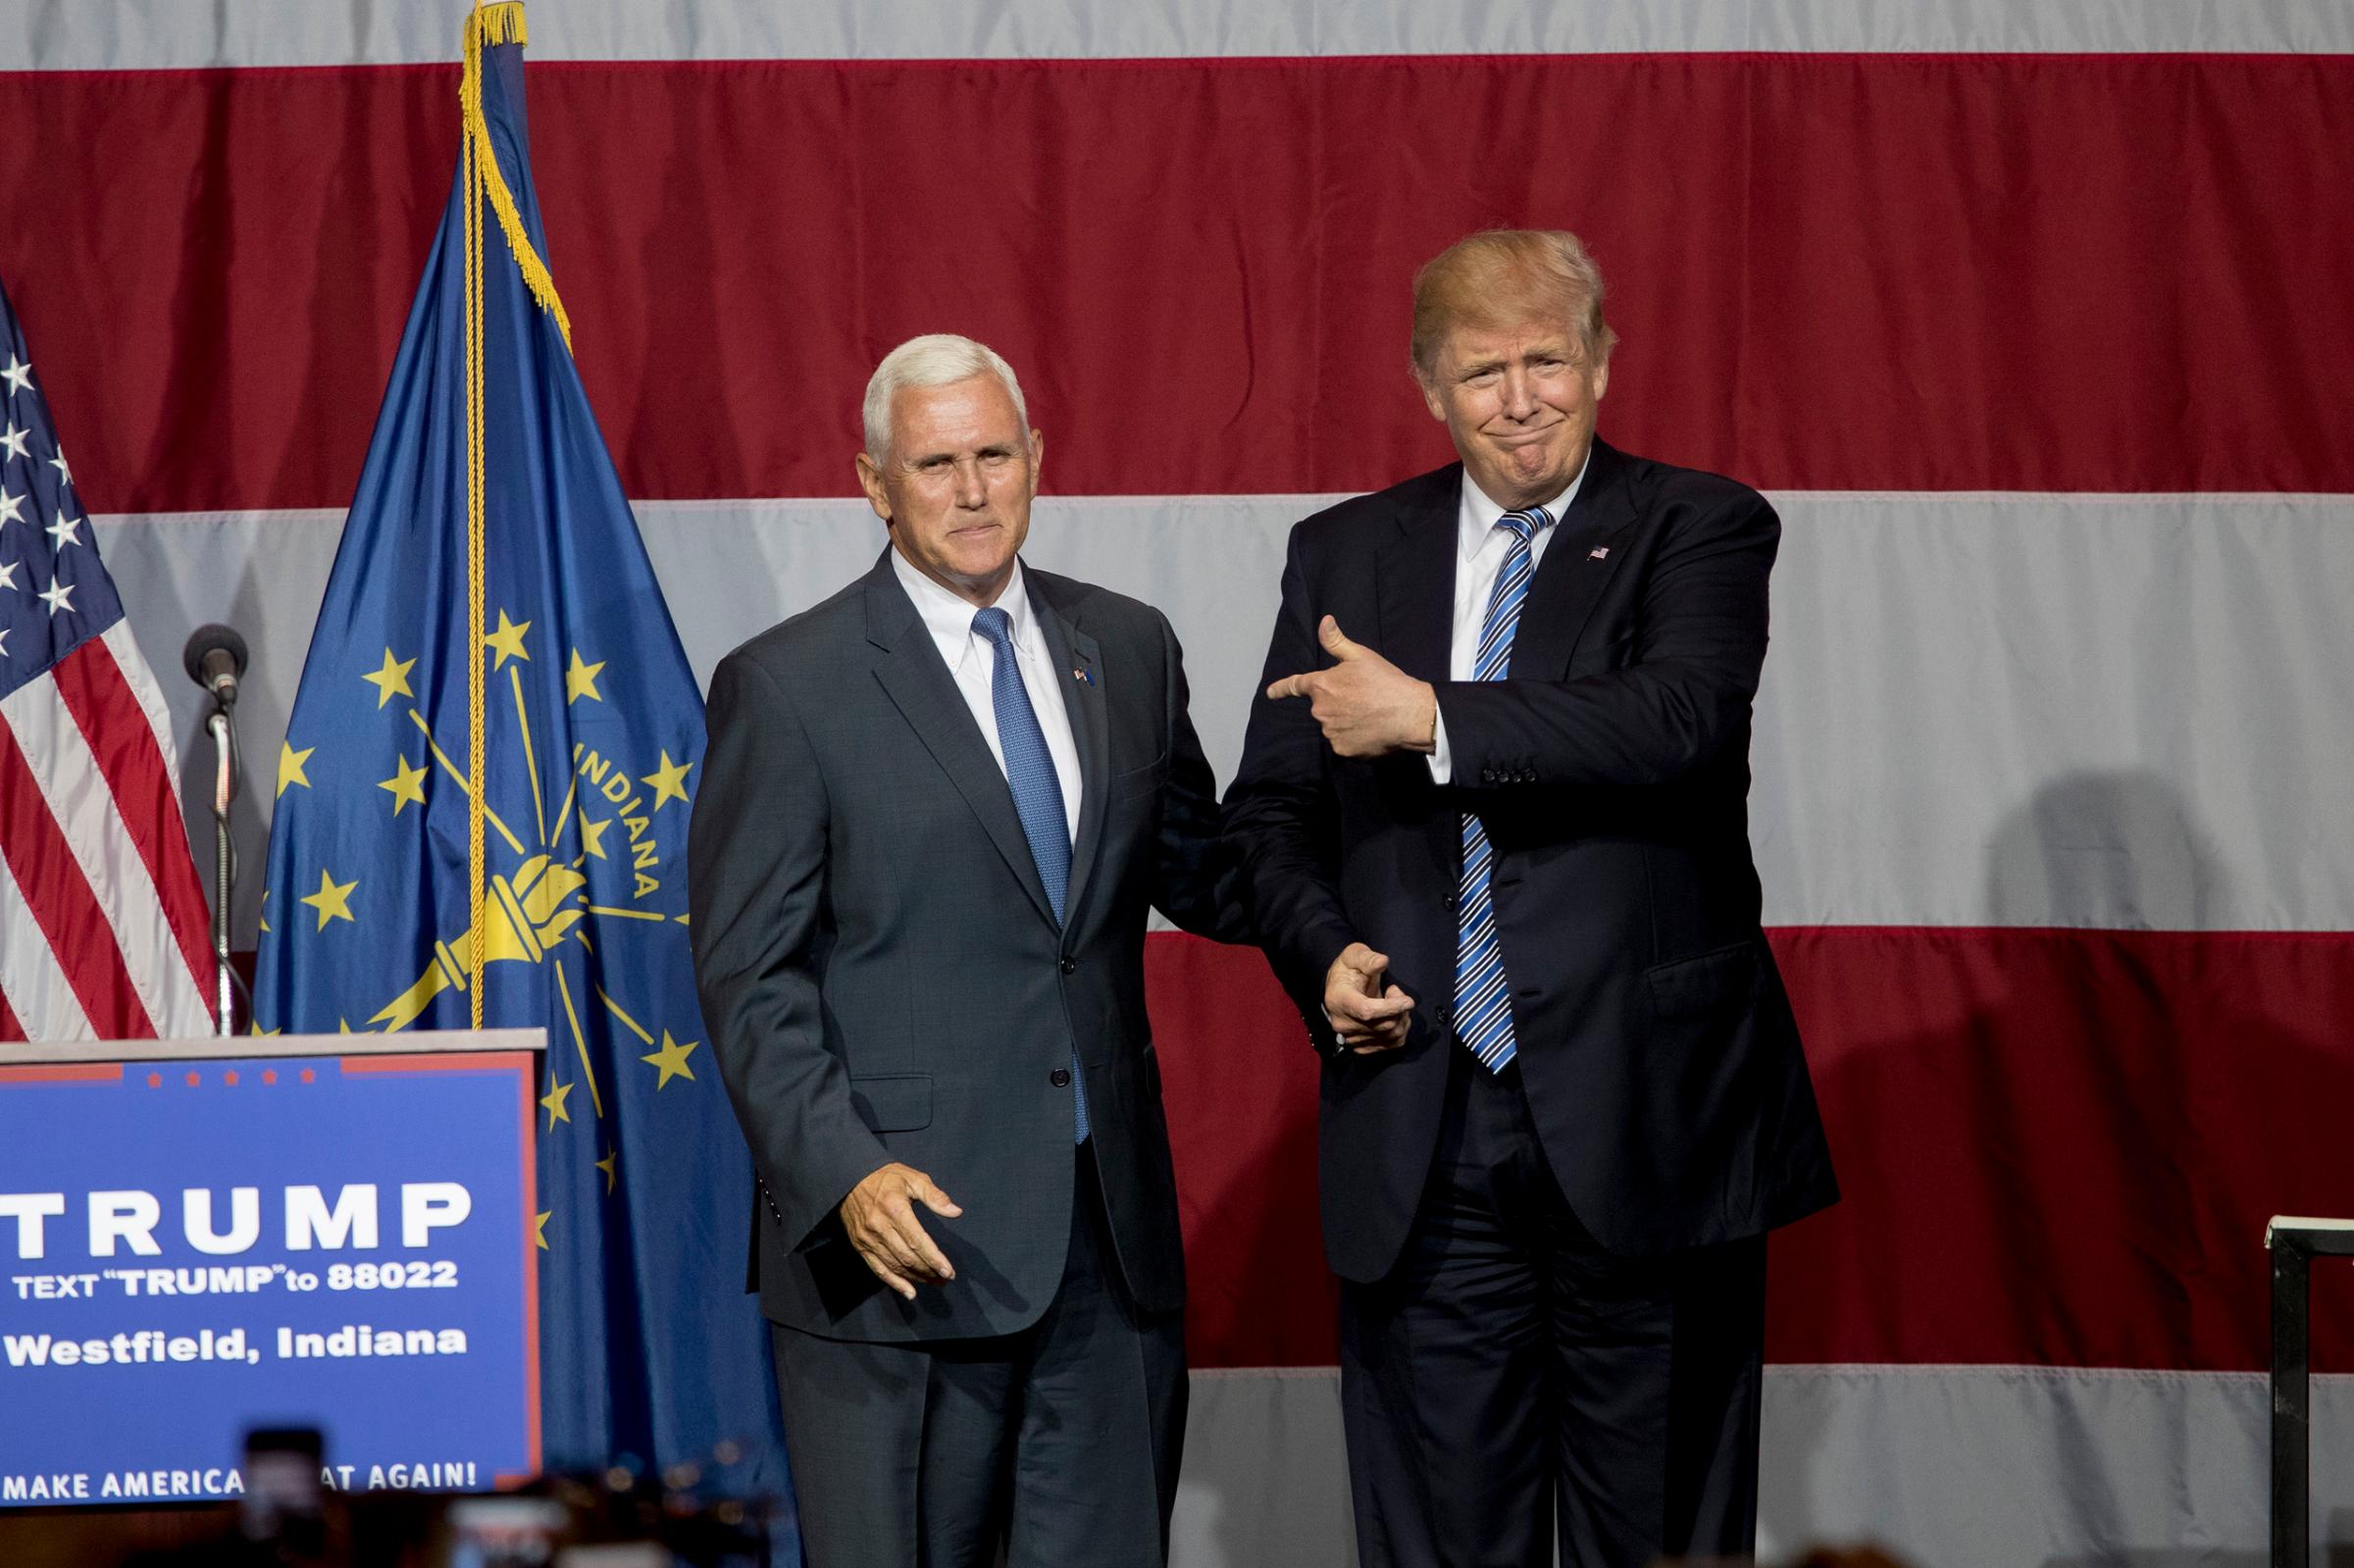 Republican presidential candidate Donald Trump greets Indiana Gov. Mike Pence at the Grand Park Events Center in Westfield, Ind. on July 12, 2016.